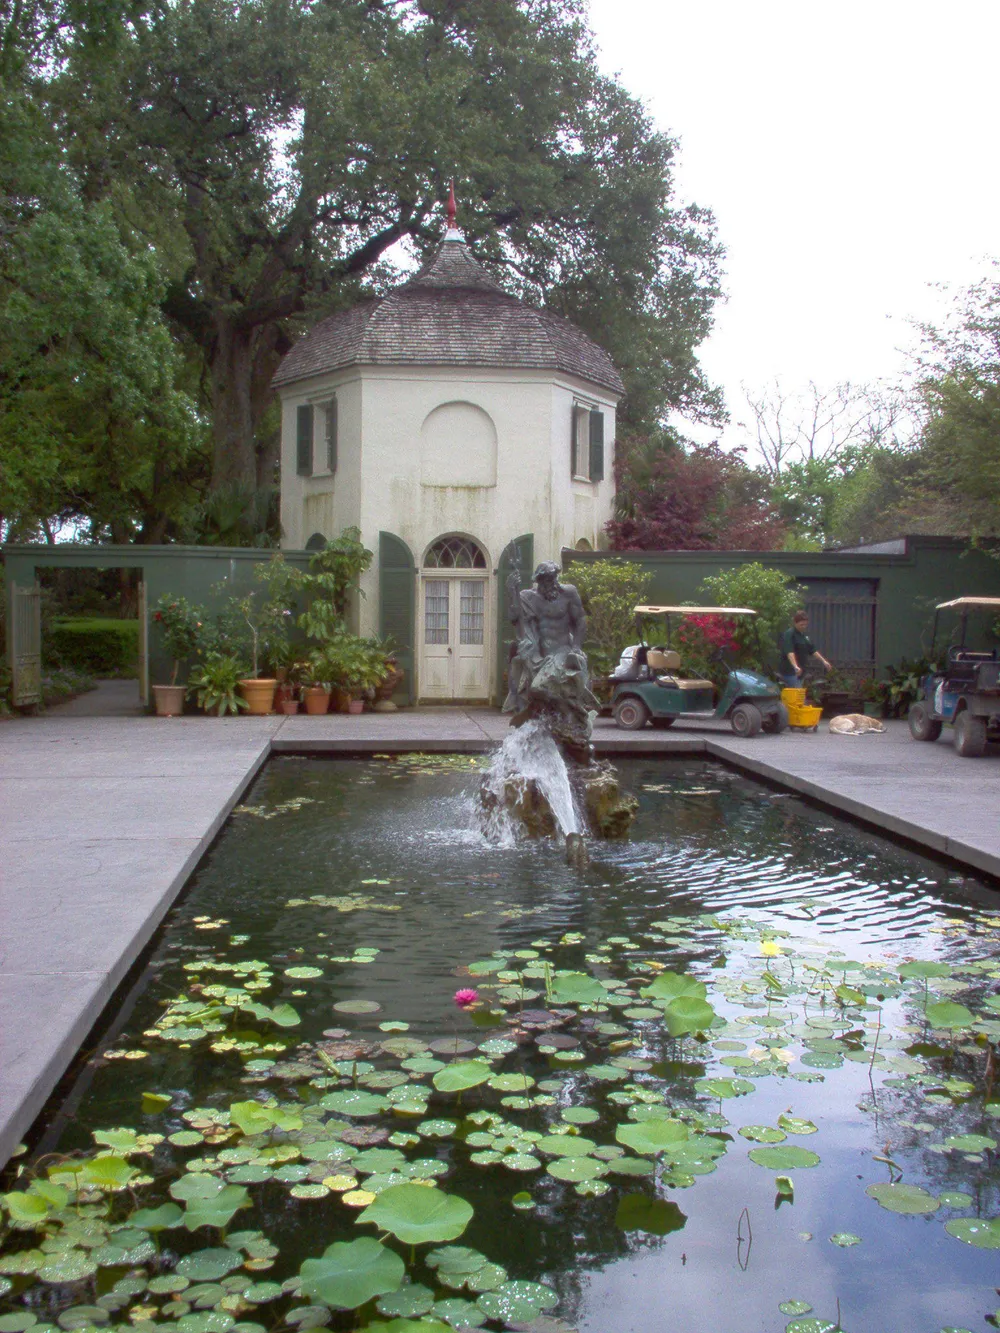 A serene garden scene with a reflective pond featuring water lilies a fountain statue and a quaint garden structure in the background